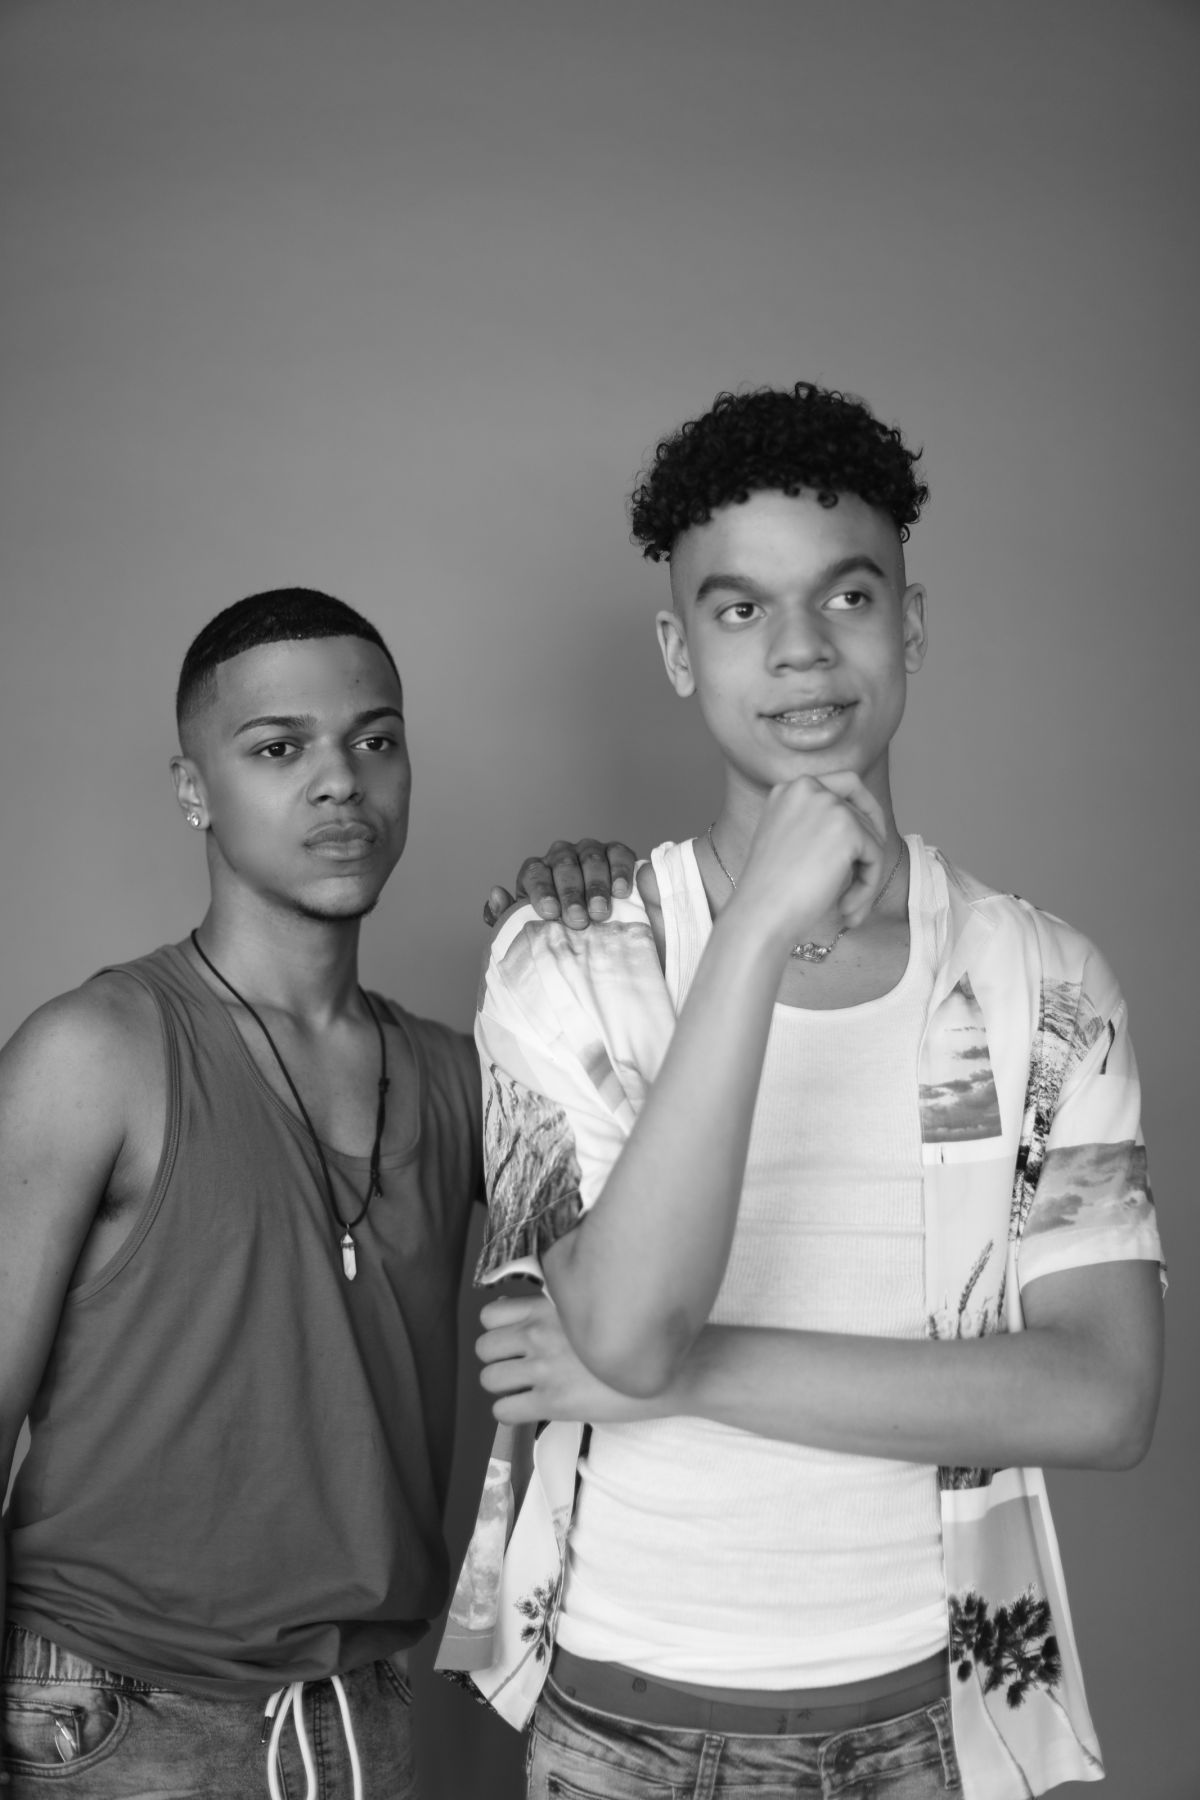 Wesley De Jesus Bruno, Los Dos Hermanos The Two Brothers, Black and White Photograph, 10 x 15&quo...